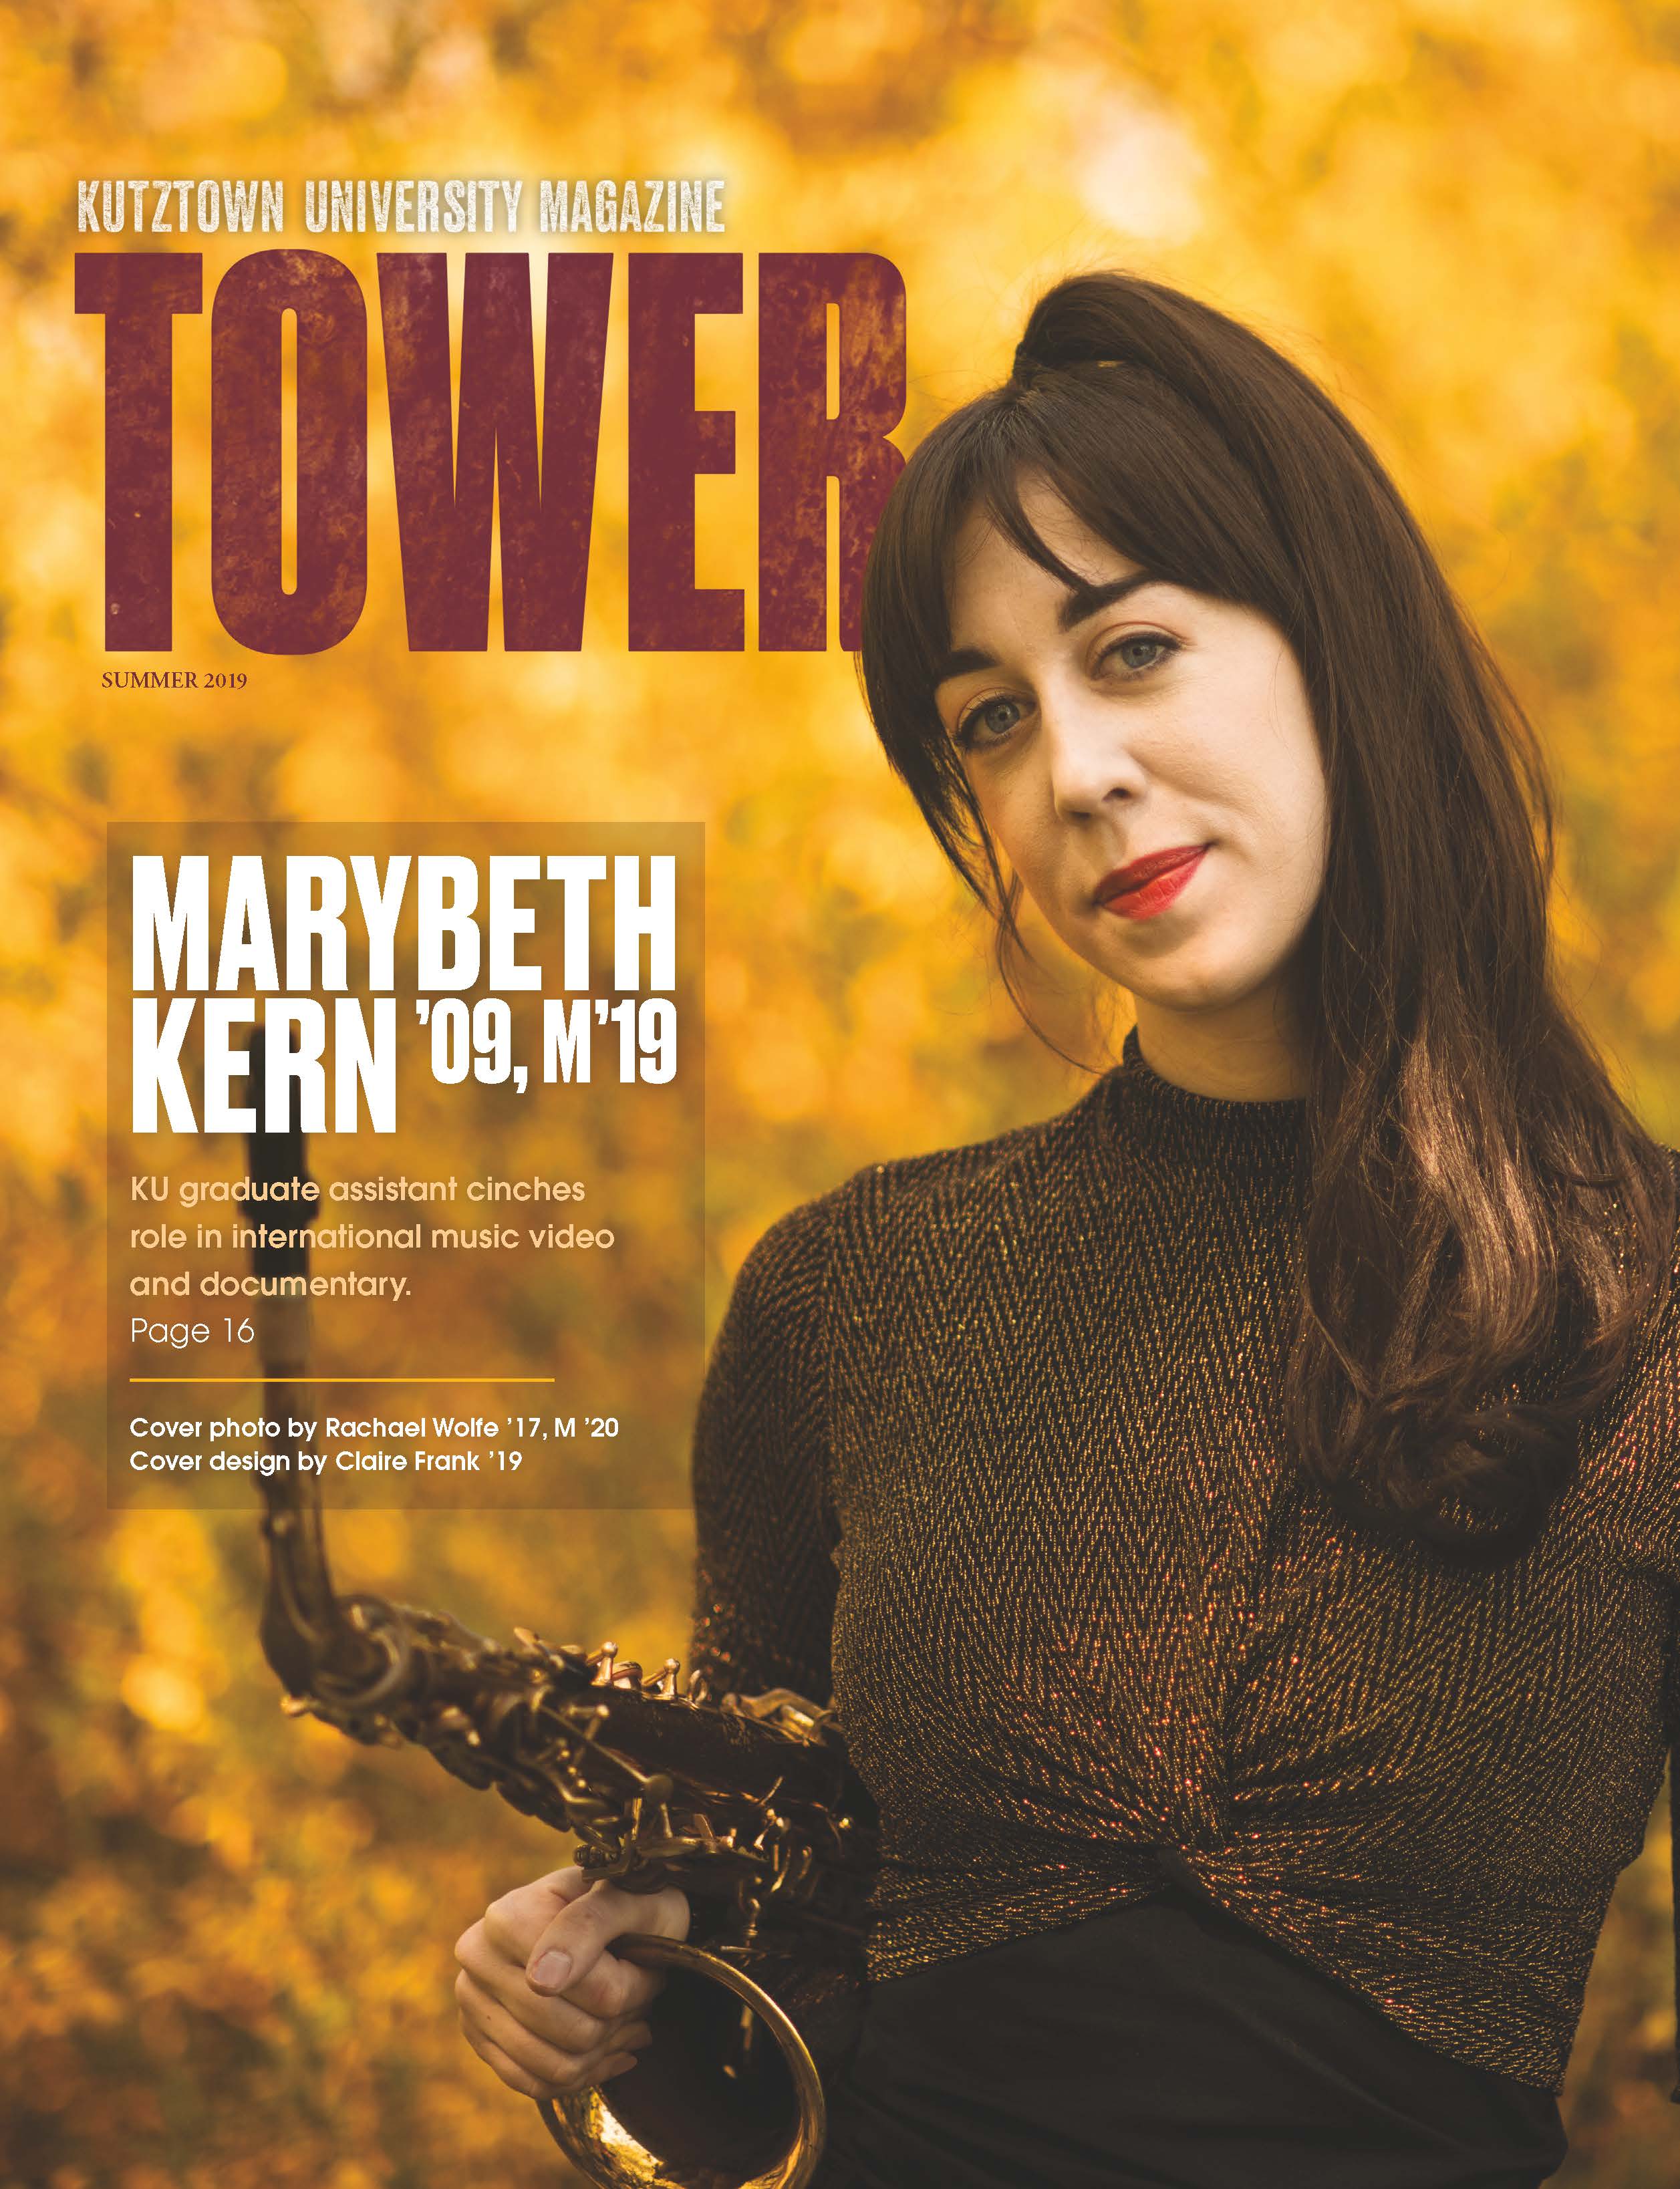 Kutztown University Magazine front cover featuring Marybeth Kern, Tower, Summer 2019